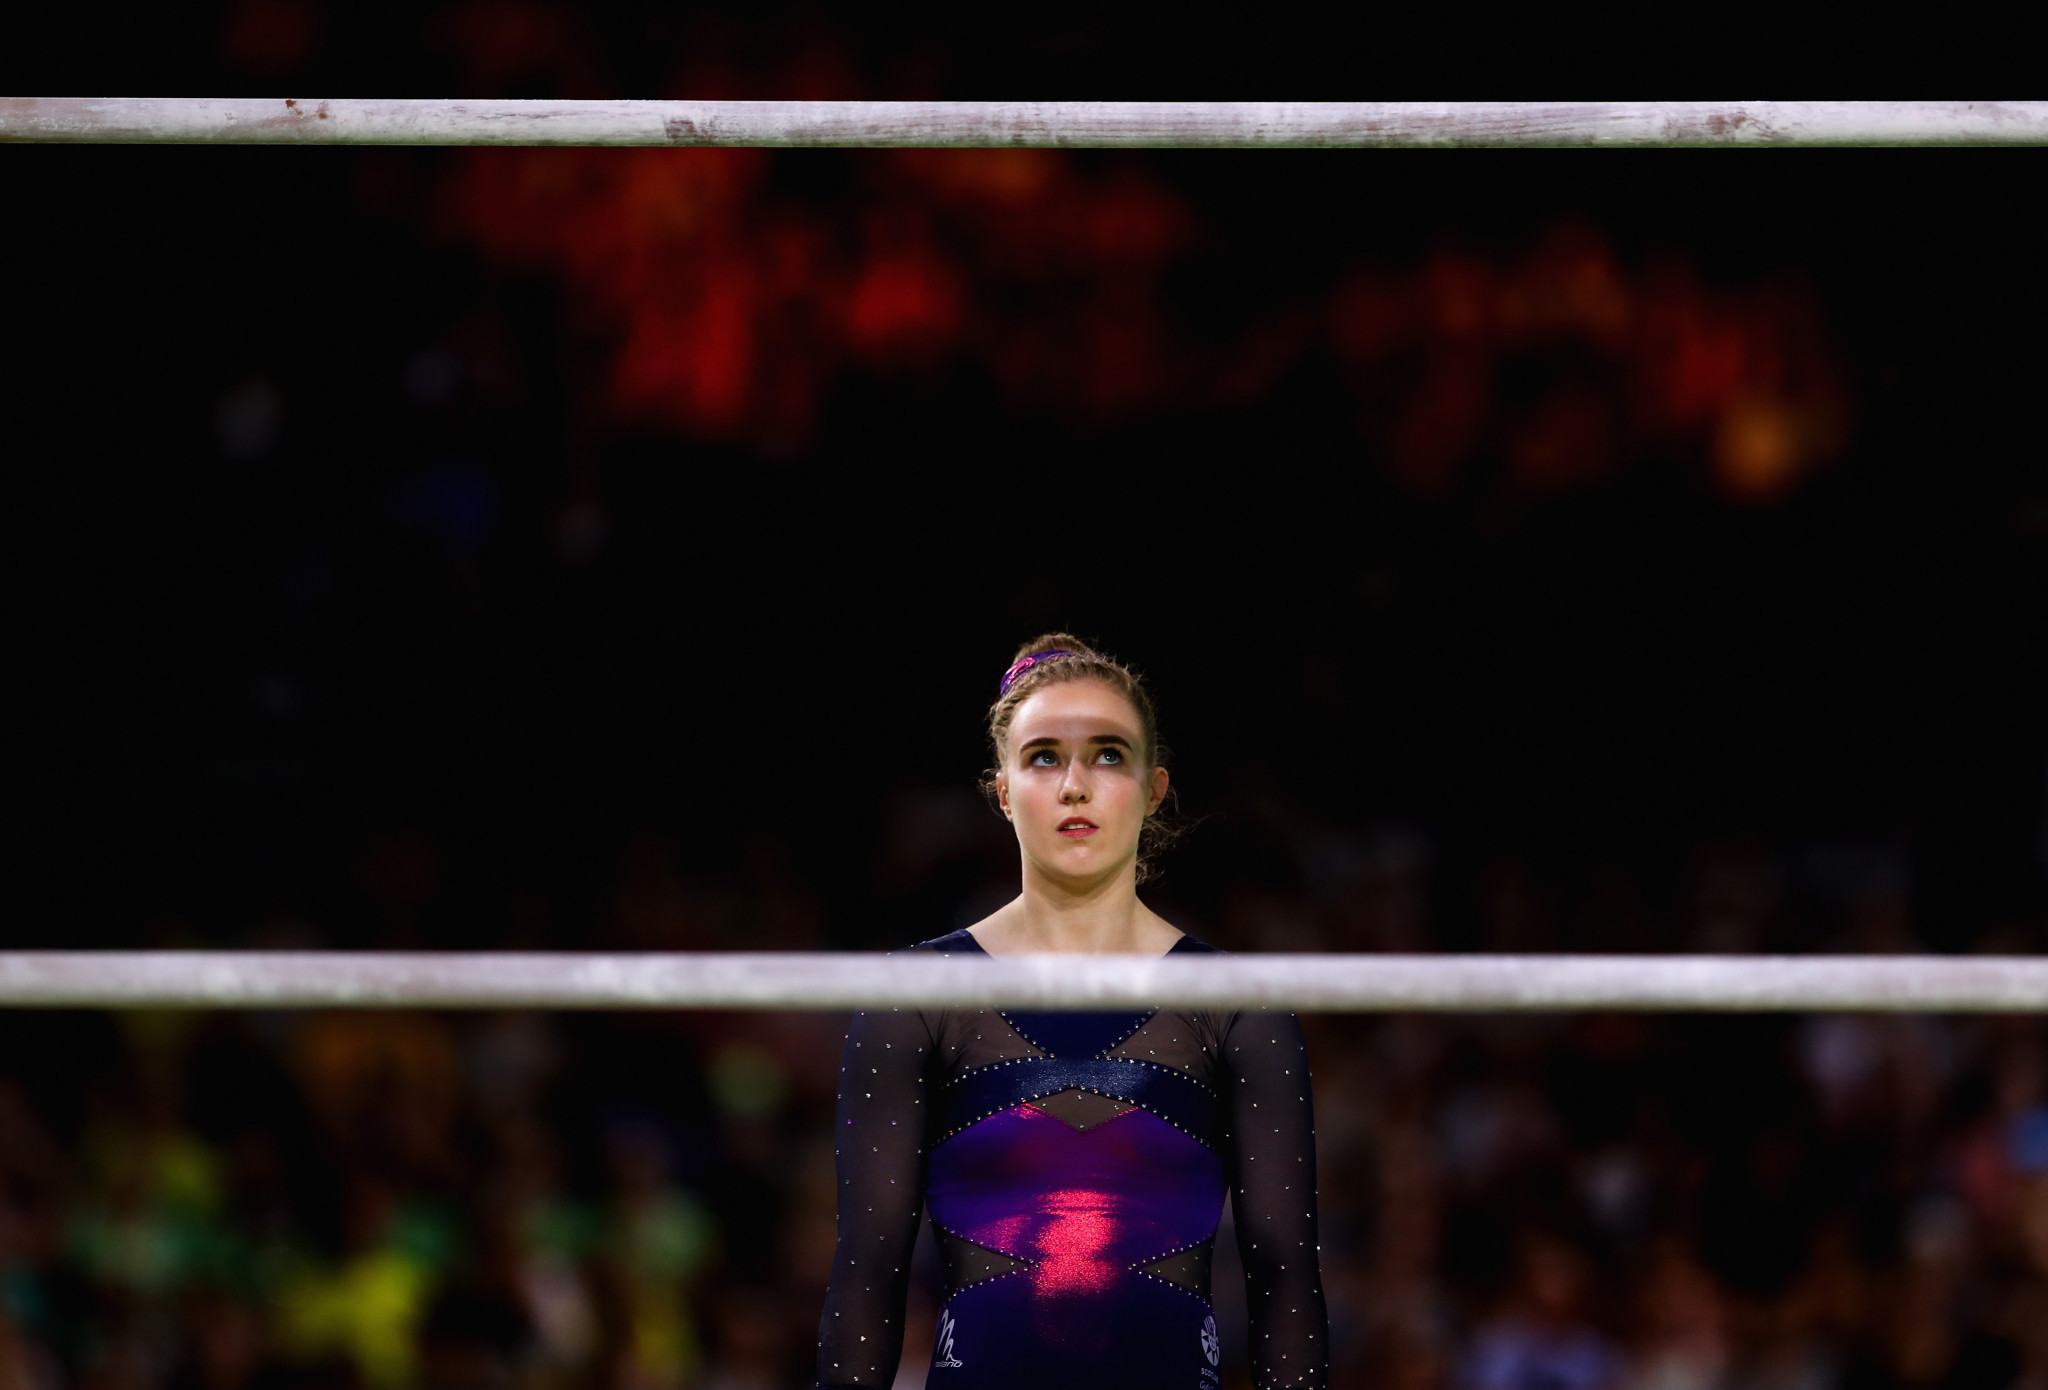 Cara Kennedy is one of the additions to the gymnastics team ©Getty Images